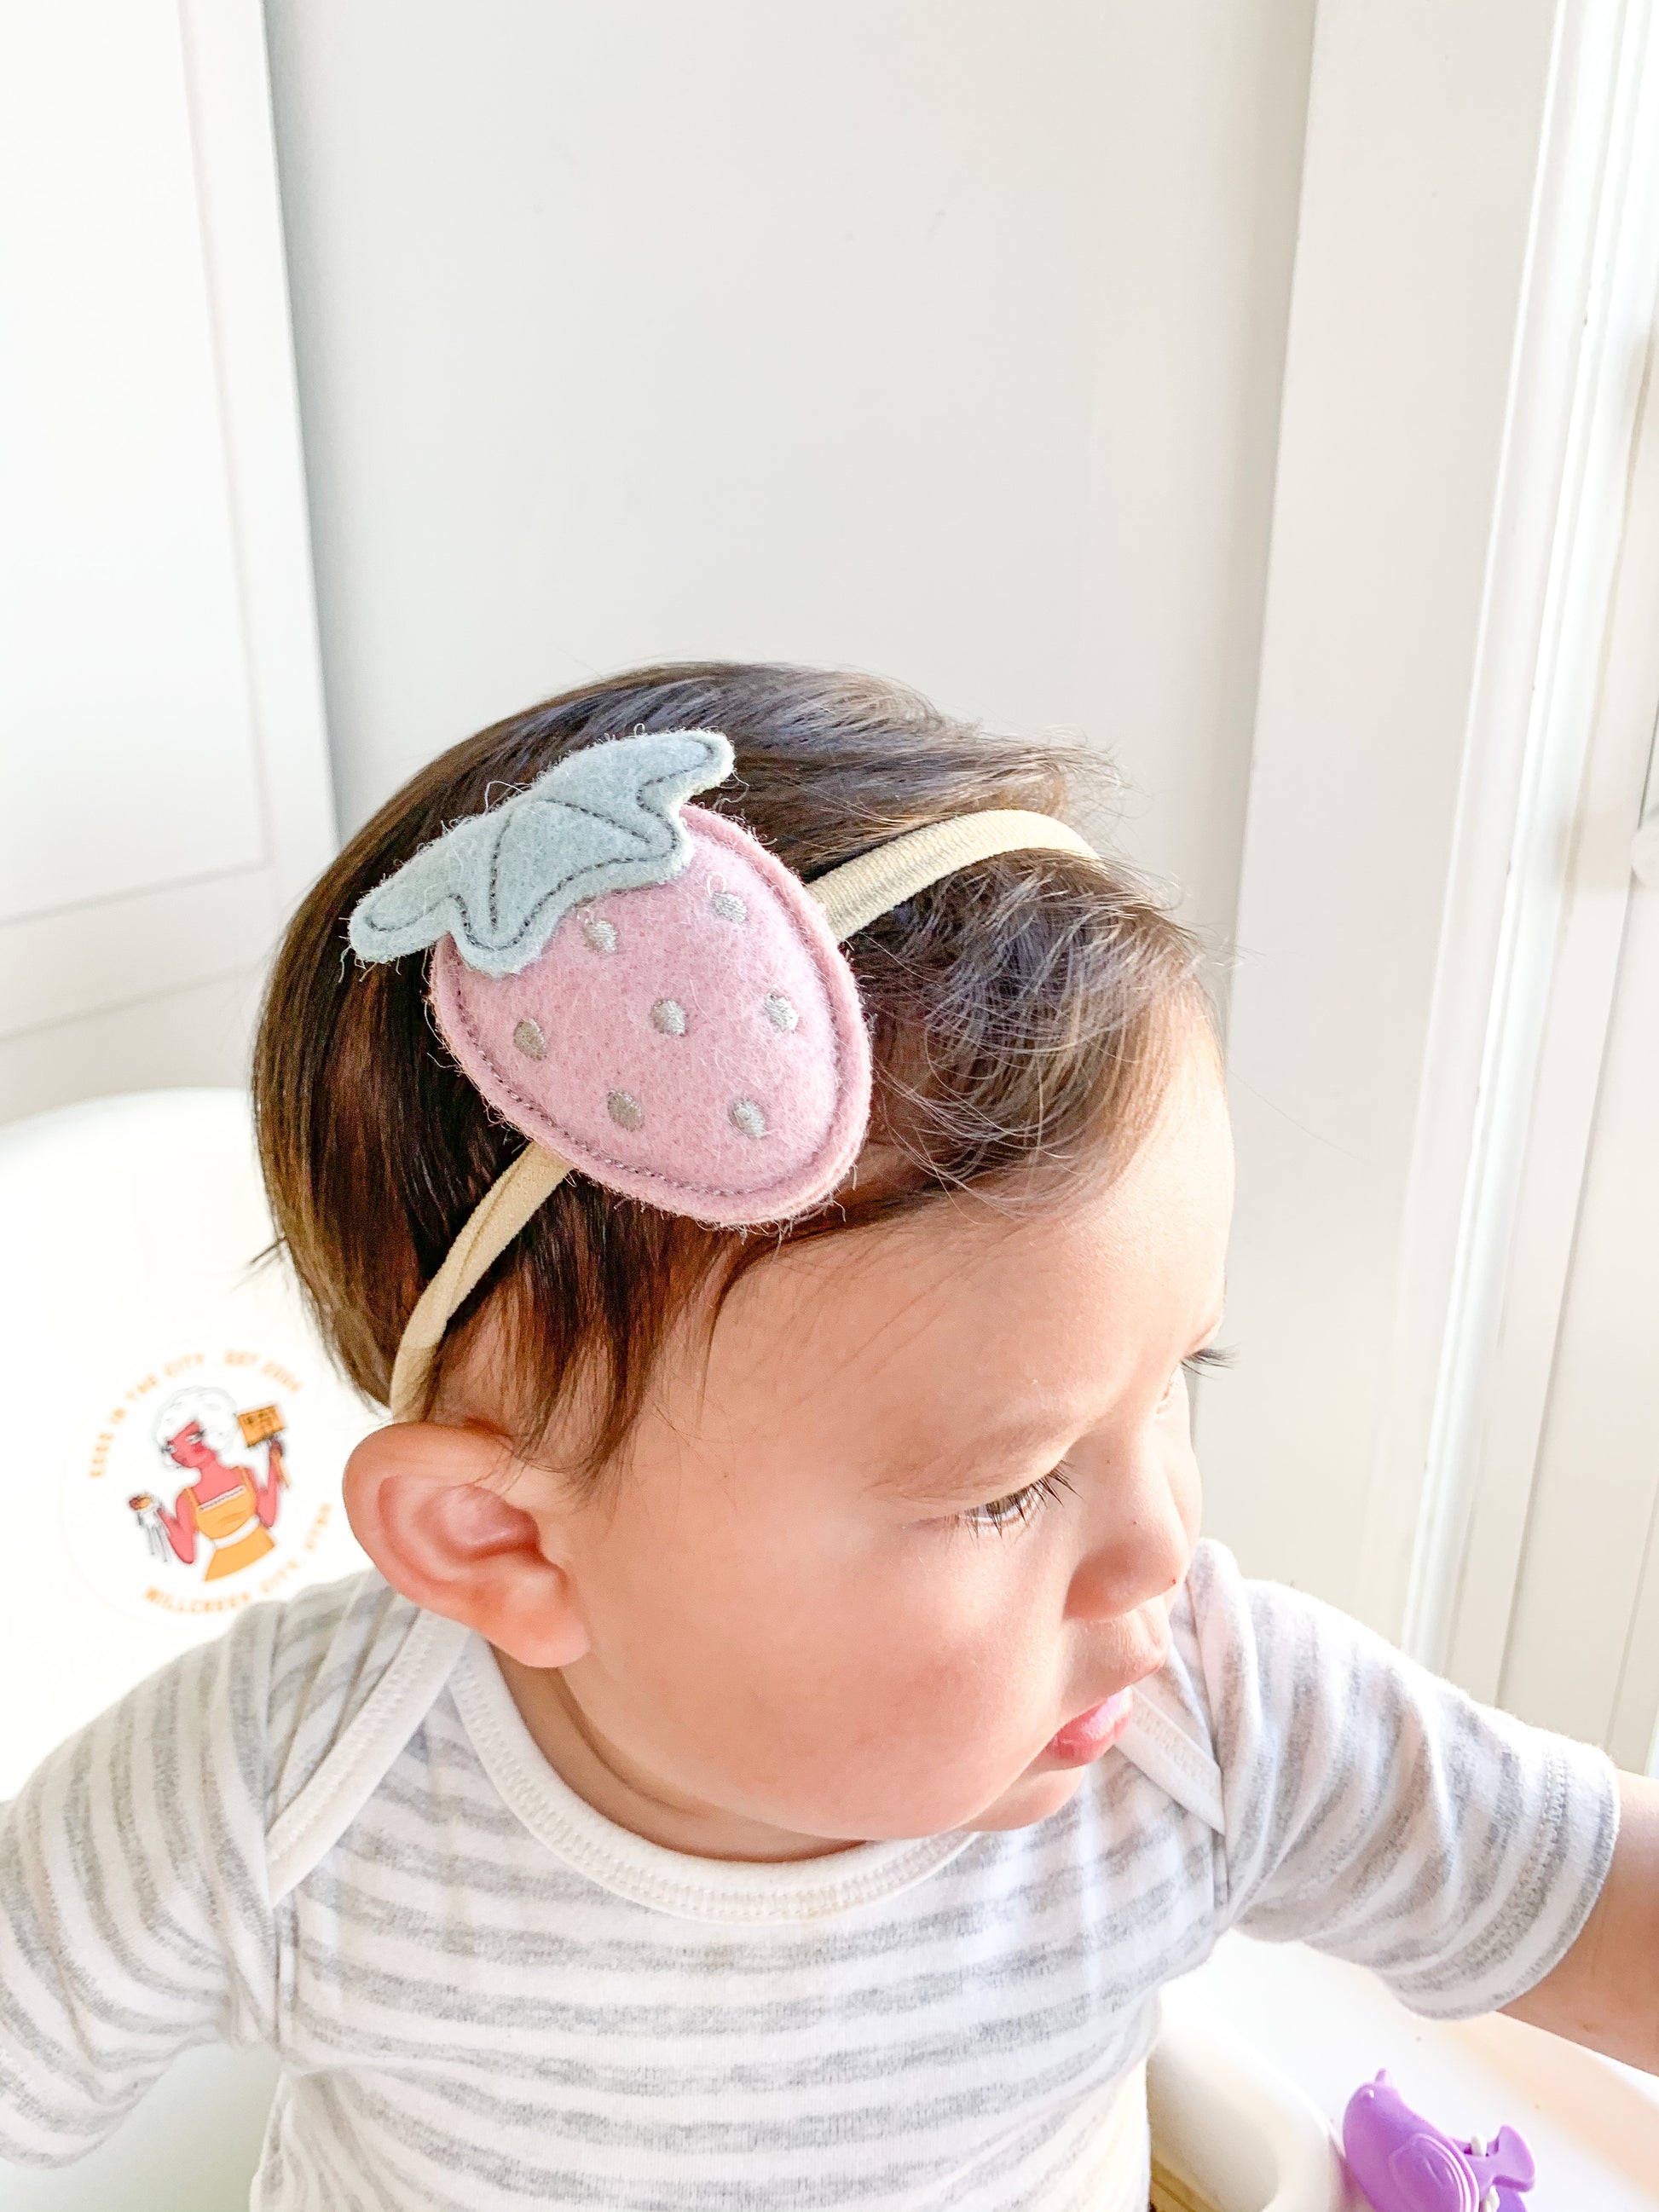 Our mascot fruit, the strawberry, in a soft pink plush form on an elastic nylon headband for your little! Great for kids with little to no hair. The nylon elastic is super stretchy and super soft.